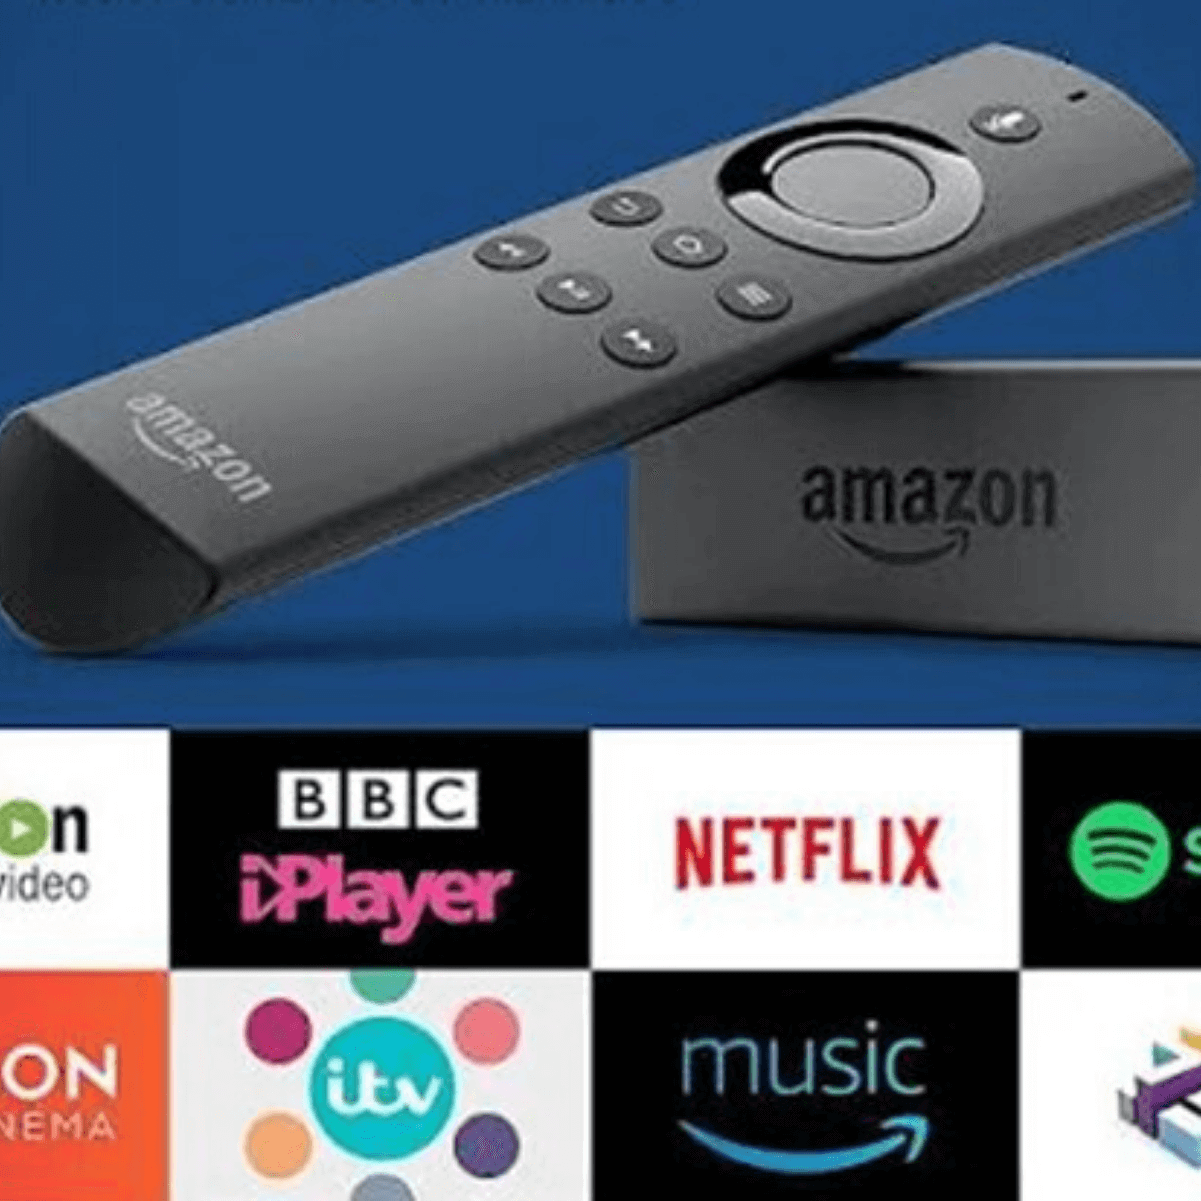 amazon fire stick what channels can you get